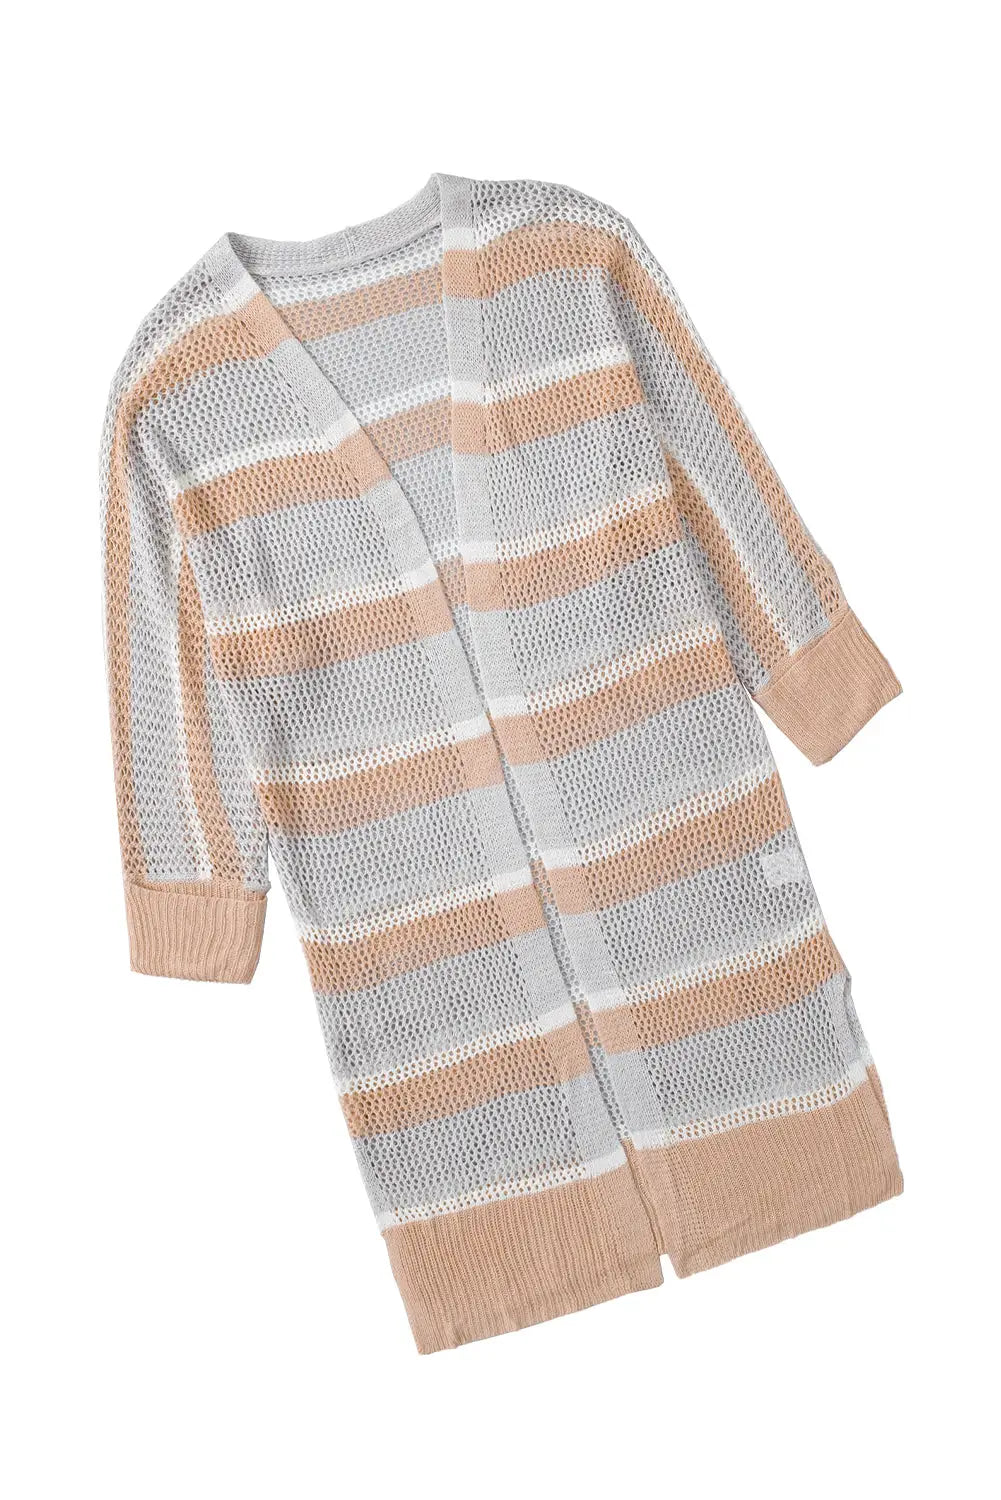 Gray days end tan open knit striped cardigan - 2xl / 100% acrylic - sweaters & cardigans